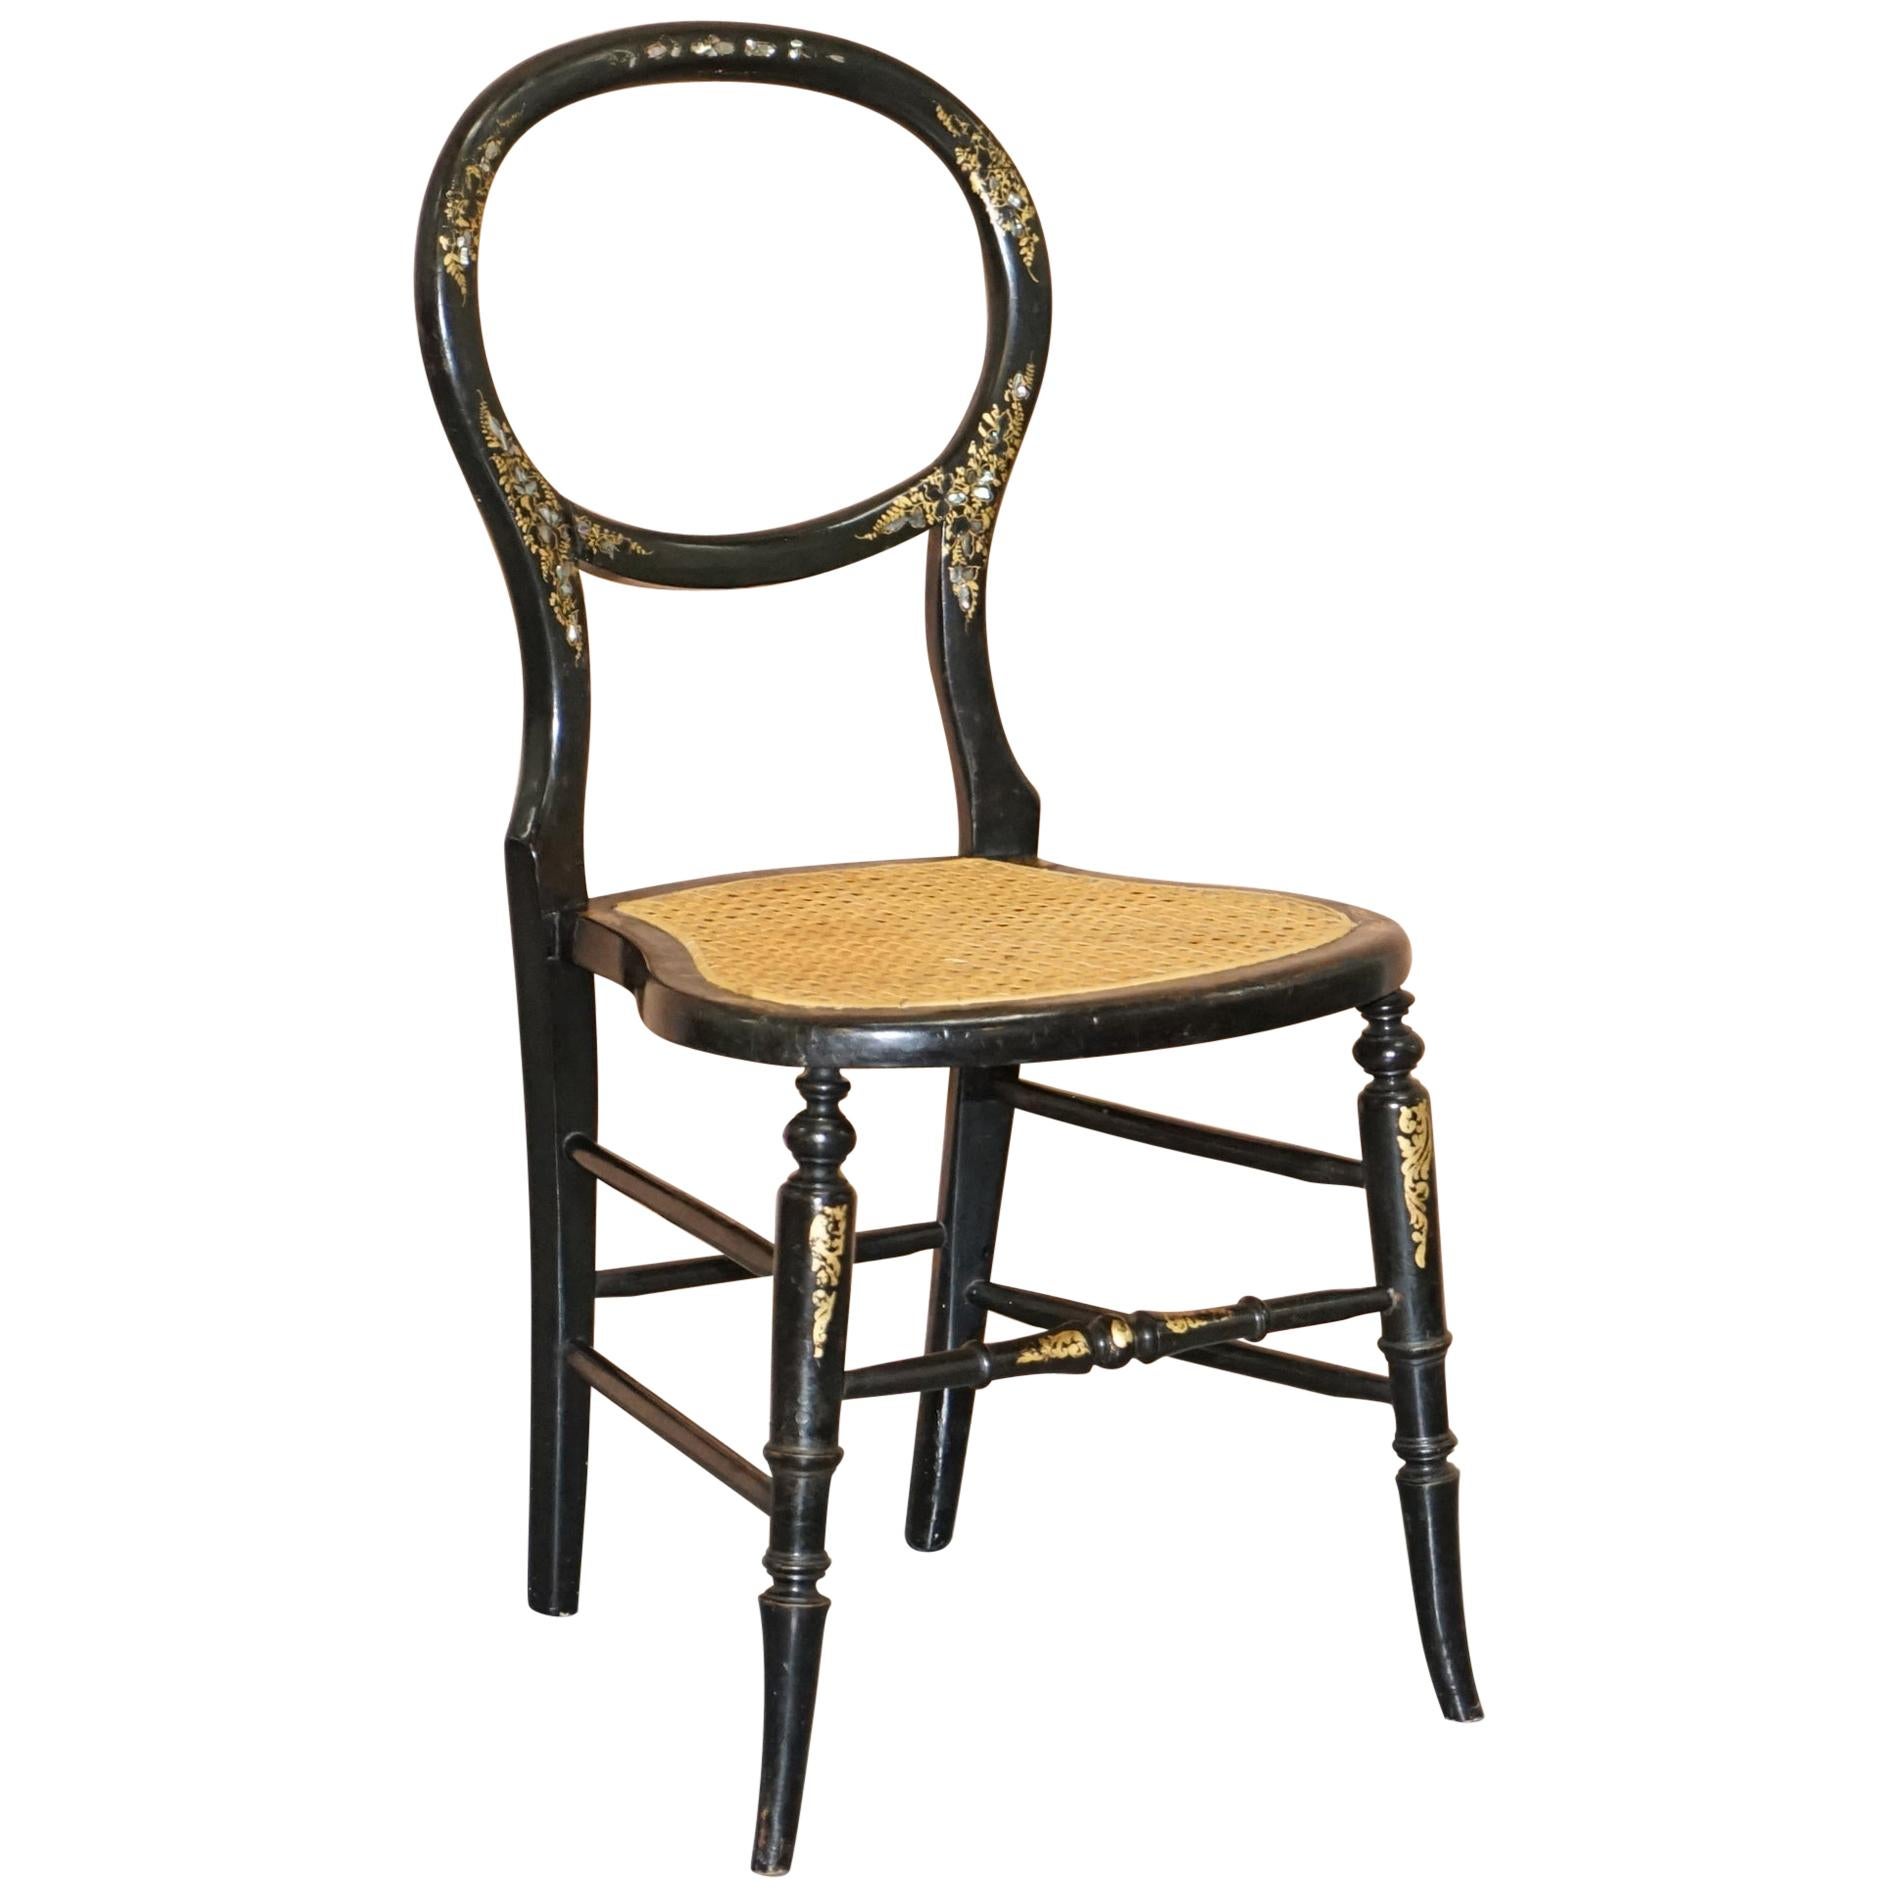 Very Rare Regency circa 1810 Ebonized Berger Rattan Mother of Pearl Side Chair